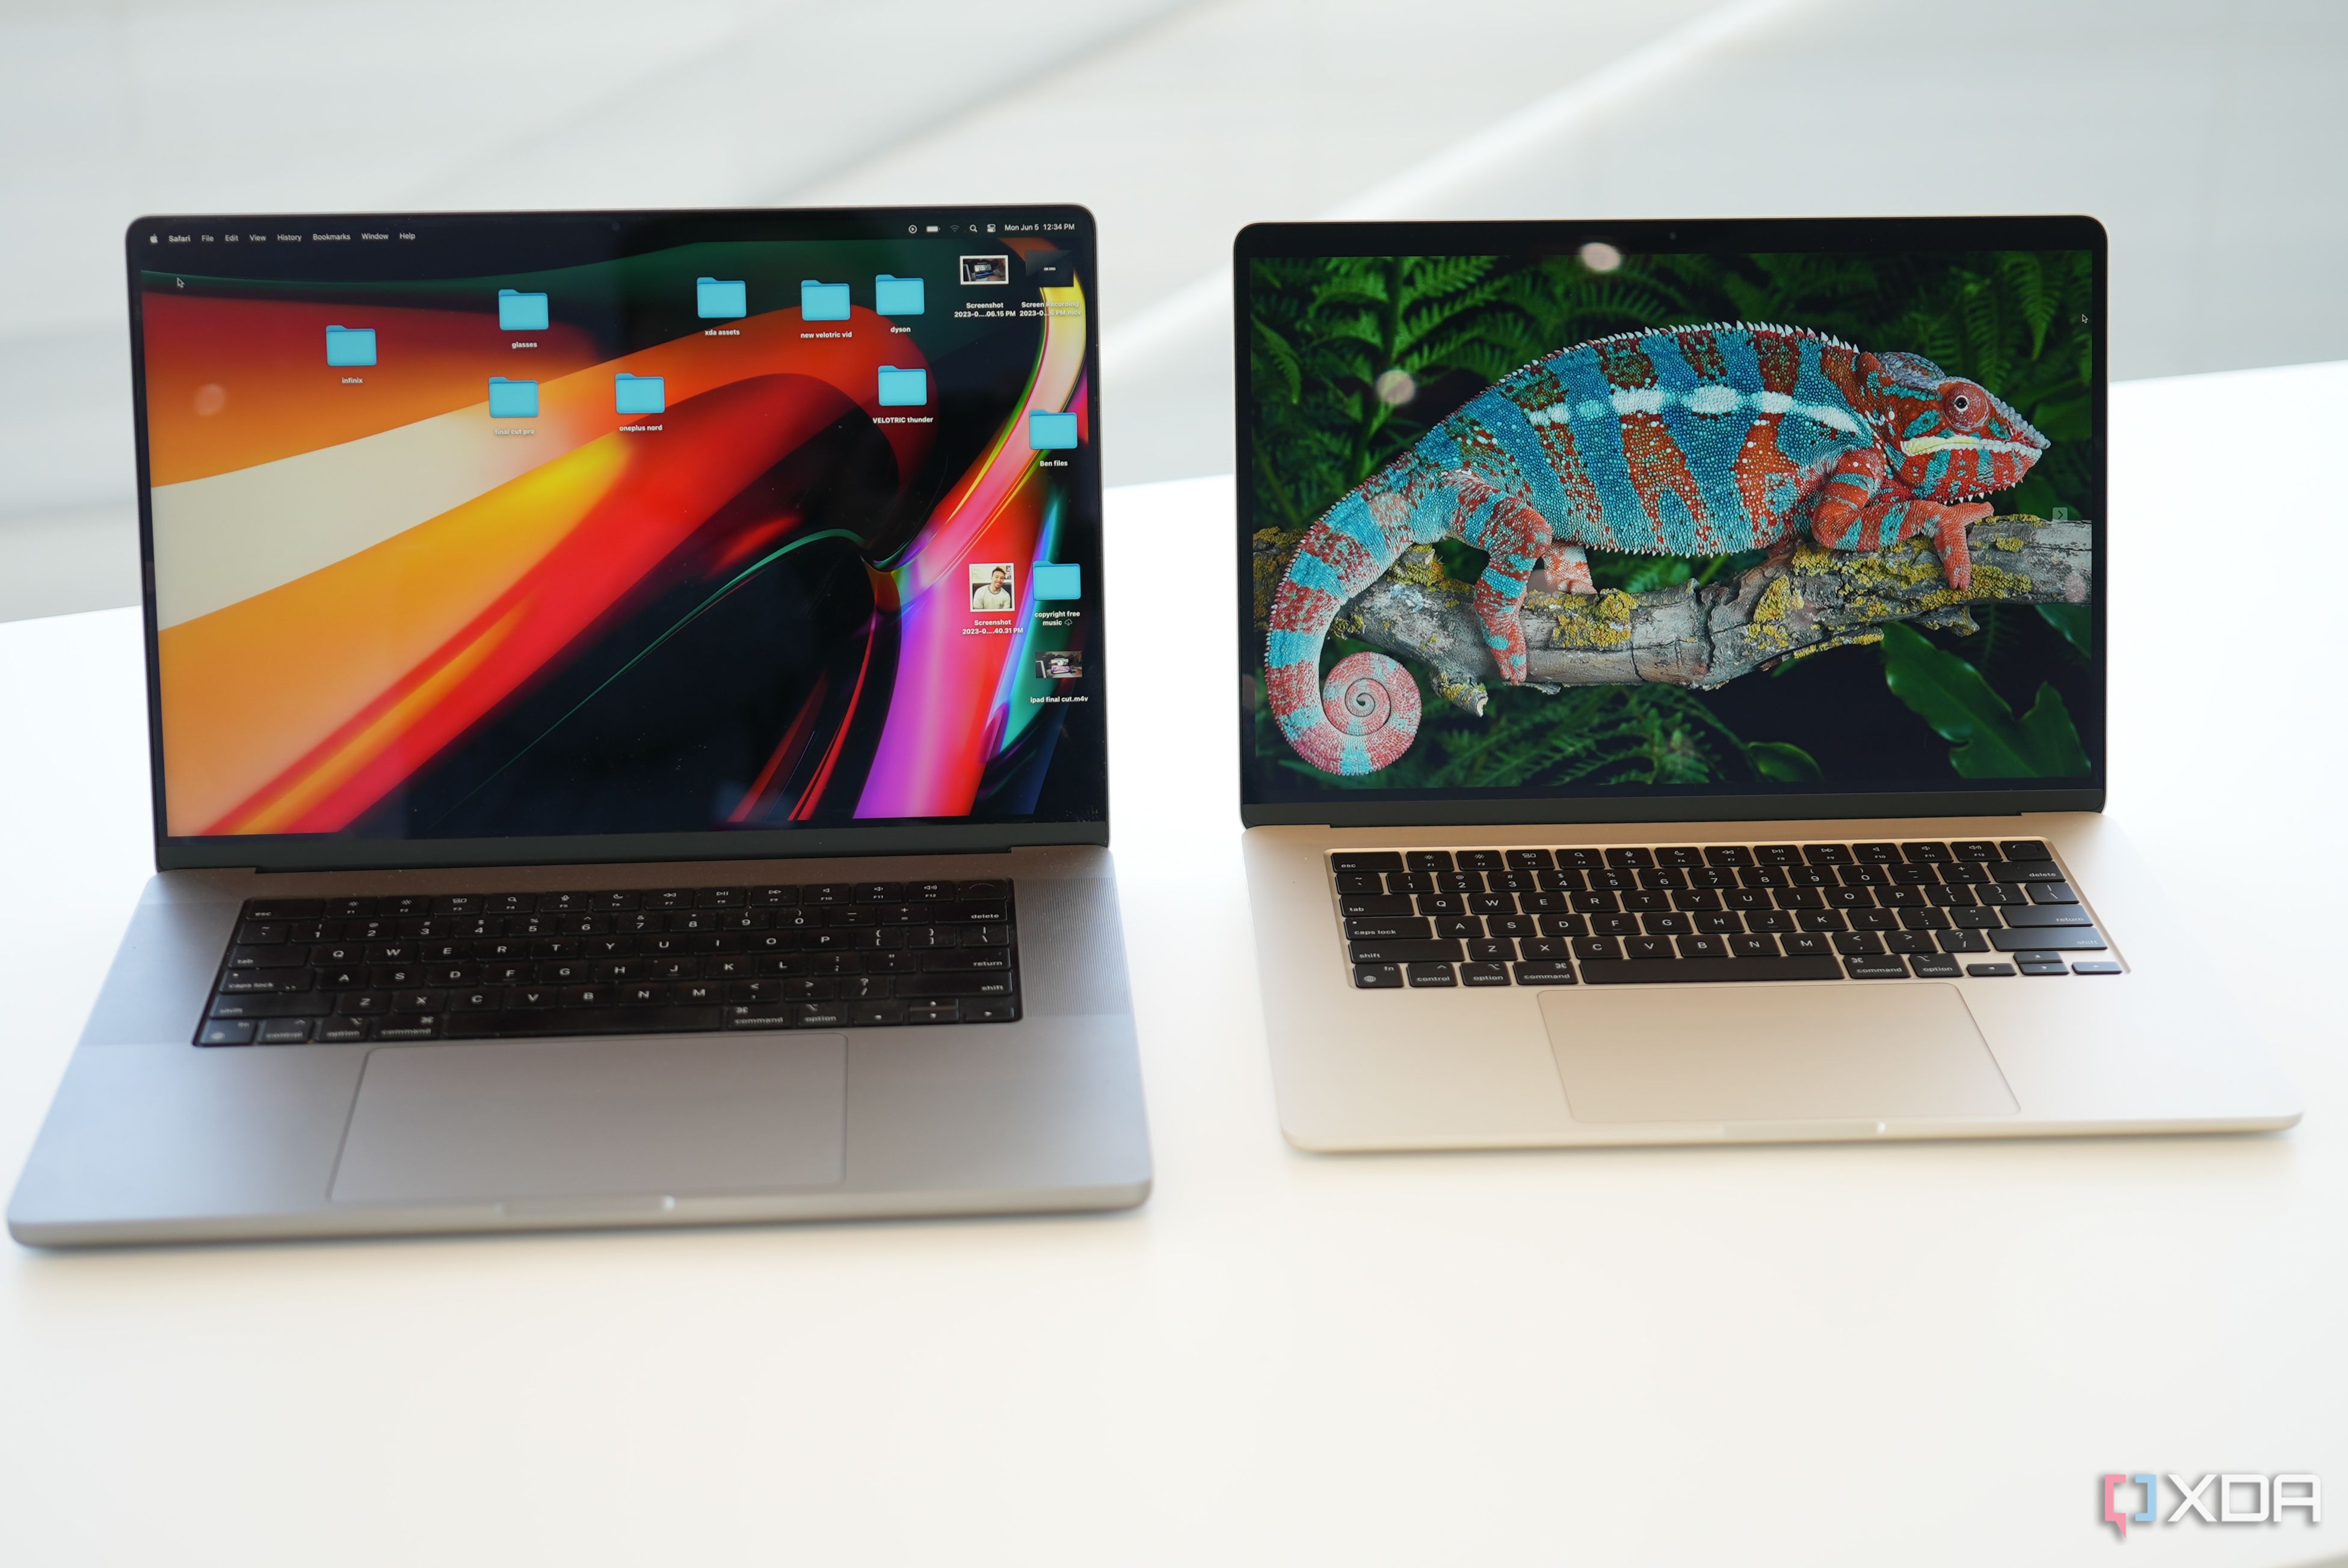 Apple's 15-Inch MacBook Air Vs. 13-Inch MacBook Air: What's the Difference?